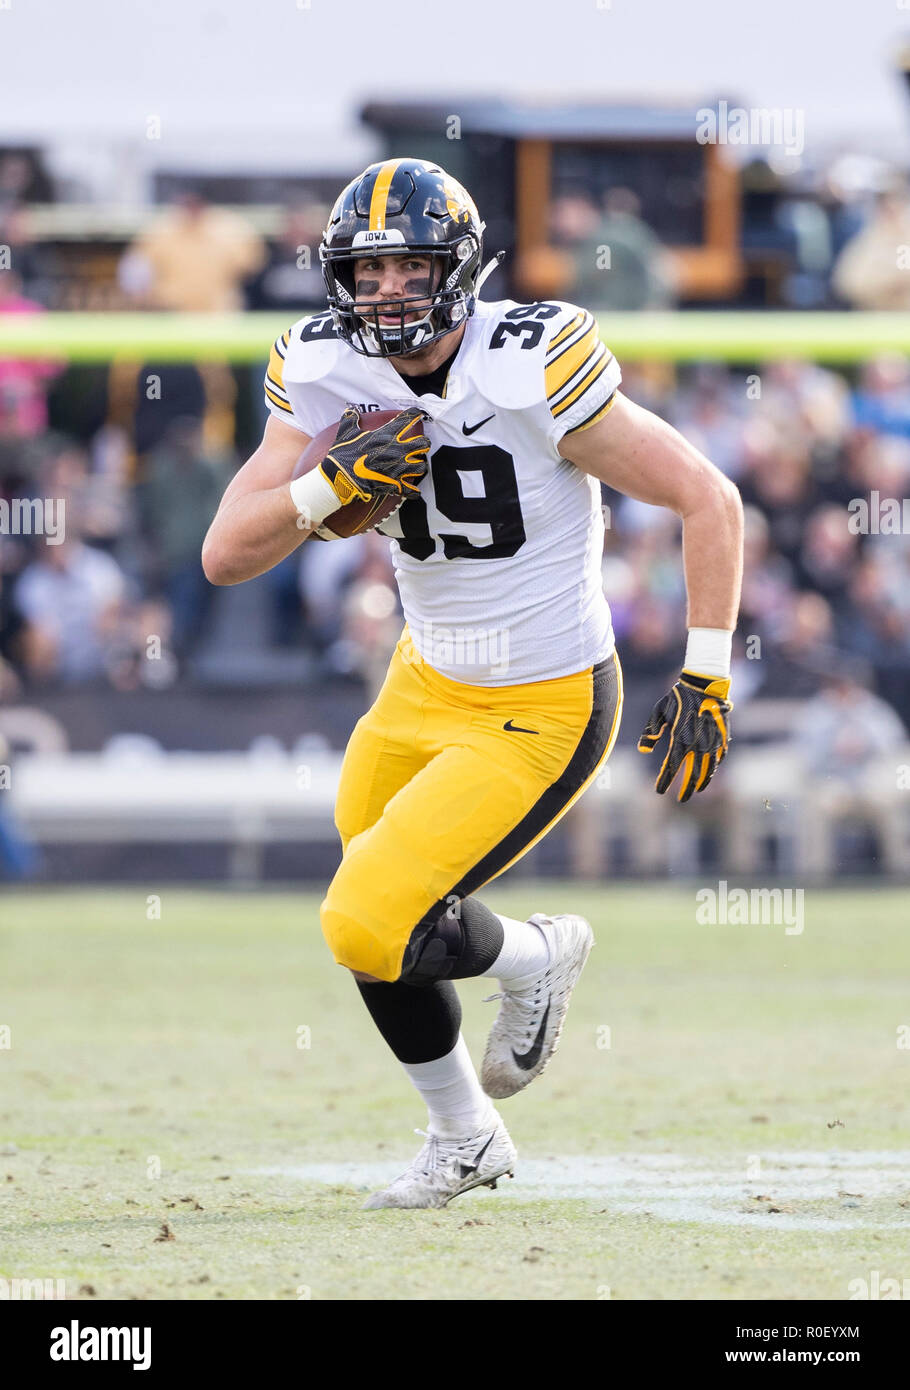 November 03, 2018: Iowa tight end Nate Wieting (39) runs with the ball after the catch during NCAA football game action between the Iowa Hawkeyes and the Purdue Boilermakers at Ross-Ade Stadium in West Lafayette, Indiana. Purdue defeated Iowa 38-36. John Mersits/CSM. Stock Photo